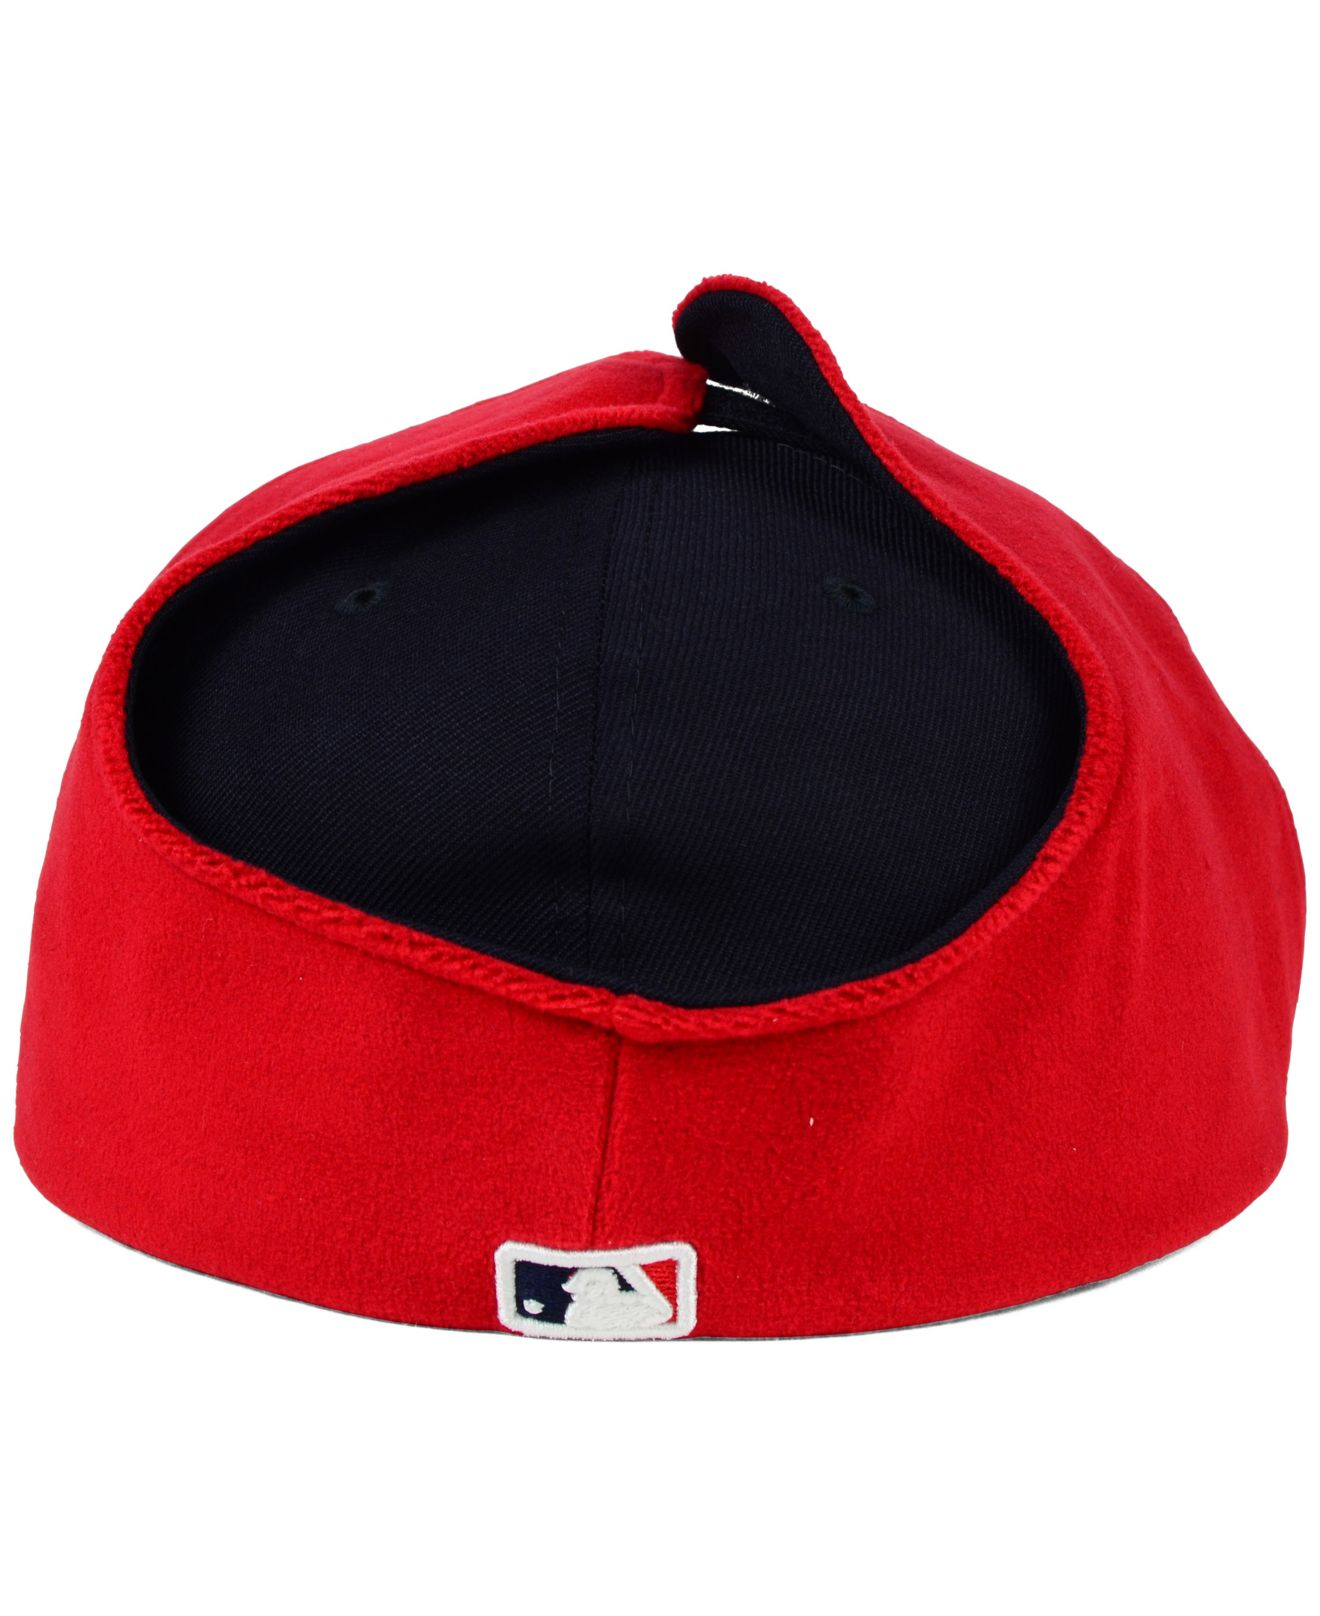 MLB Dog Ear 59Fifty Fitted Hat Collection by MLB x New Era